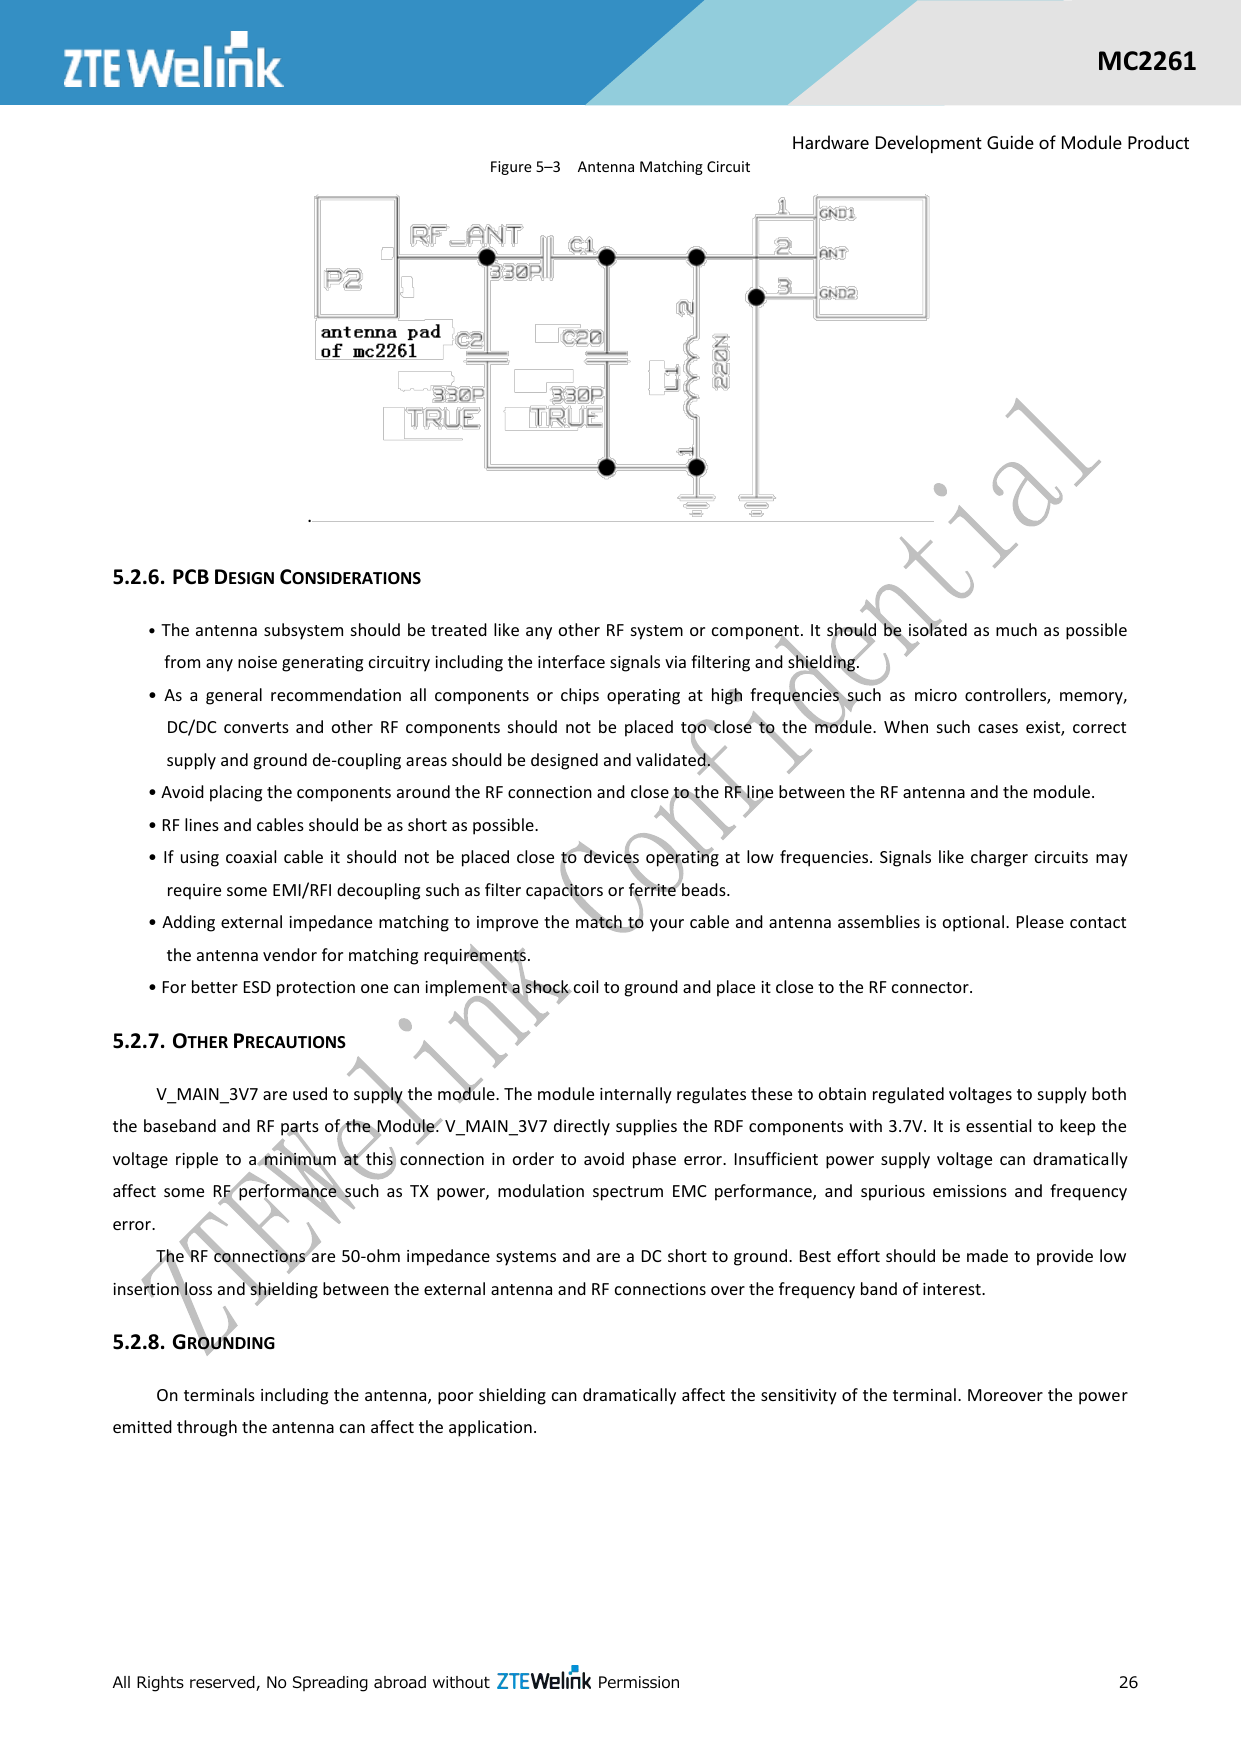  All Rights reserved, No Spreading abroad without    Permission      26  MC2261  Hardware Development Guide of Module Product Figure 5–3  Antenna Matching Circuit .  5.2.6. PCB DESIGN CONSIDERATIONS • The antenna subsystem should be treated like any other RF system or component. It should be isolated as much as possible from any noise generating circuitry including the interface signals via filtering and shielding. •  As  a  general  recommendation  all  components  or  chips  operating  at  high  frequencies  such  as  micro  controllers,  memory, DC/DC  converts  and  other  RF  components  should  not  be  placed  too  close  to  the  module.  When  such  cases  exist,  correct supply and ground de-coupling areas should be designed and validated. • Avoid placing the components around the RF connection and close to the RF line between the RF antenna and the module. • RF lines and cables should be as short as possible. • If  using coaxial cable it  should  not be placed close to  devices operating at  low  frequencies. Signals like charger circuits may require some EMI/RFI decoupling such as filter capacitors or ferrite beads. • Adding external impedance matching to improve the match to your cable and antenna assemblies is optional. Please contact the antenna vendor for matching requirements. • For better ESD protection one can implement a shock coil to ground and place it close to the RF connector. 5.2.7. OTHER PRECAUTIONS V_MAIN_3V7 are used to supply the module. The module internally regulates these to obtain regulated voltages to supply both the baseband and RF parts of the Module. V_MAIN_3V7 directly supplies the RDF components with 3.7V. It is essential to keep the voltage  ripple  to  a  minimum at  this connection  in  order  to  avoid  phase  error.  Insufficient  power  supply  voltage can  dramatically affect  some  RF  performance  such  as  TX  power,  modulation  spectrum  EMC  performance,  and  spurious  emissions  and  frequency error. The RF connections are 50-ohm impedance systems and are a DC short to ground. Best effort should be made to provide low insertion loss and shielding between the external antenna and RF connections over the frequency band of interest. 5.2.8. GROUNDING On terminals including the antenna, poor shielding can dramatically affect the sensitivity of the terminal. Moreover the power emitted through the antenna can affect the application. 